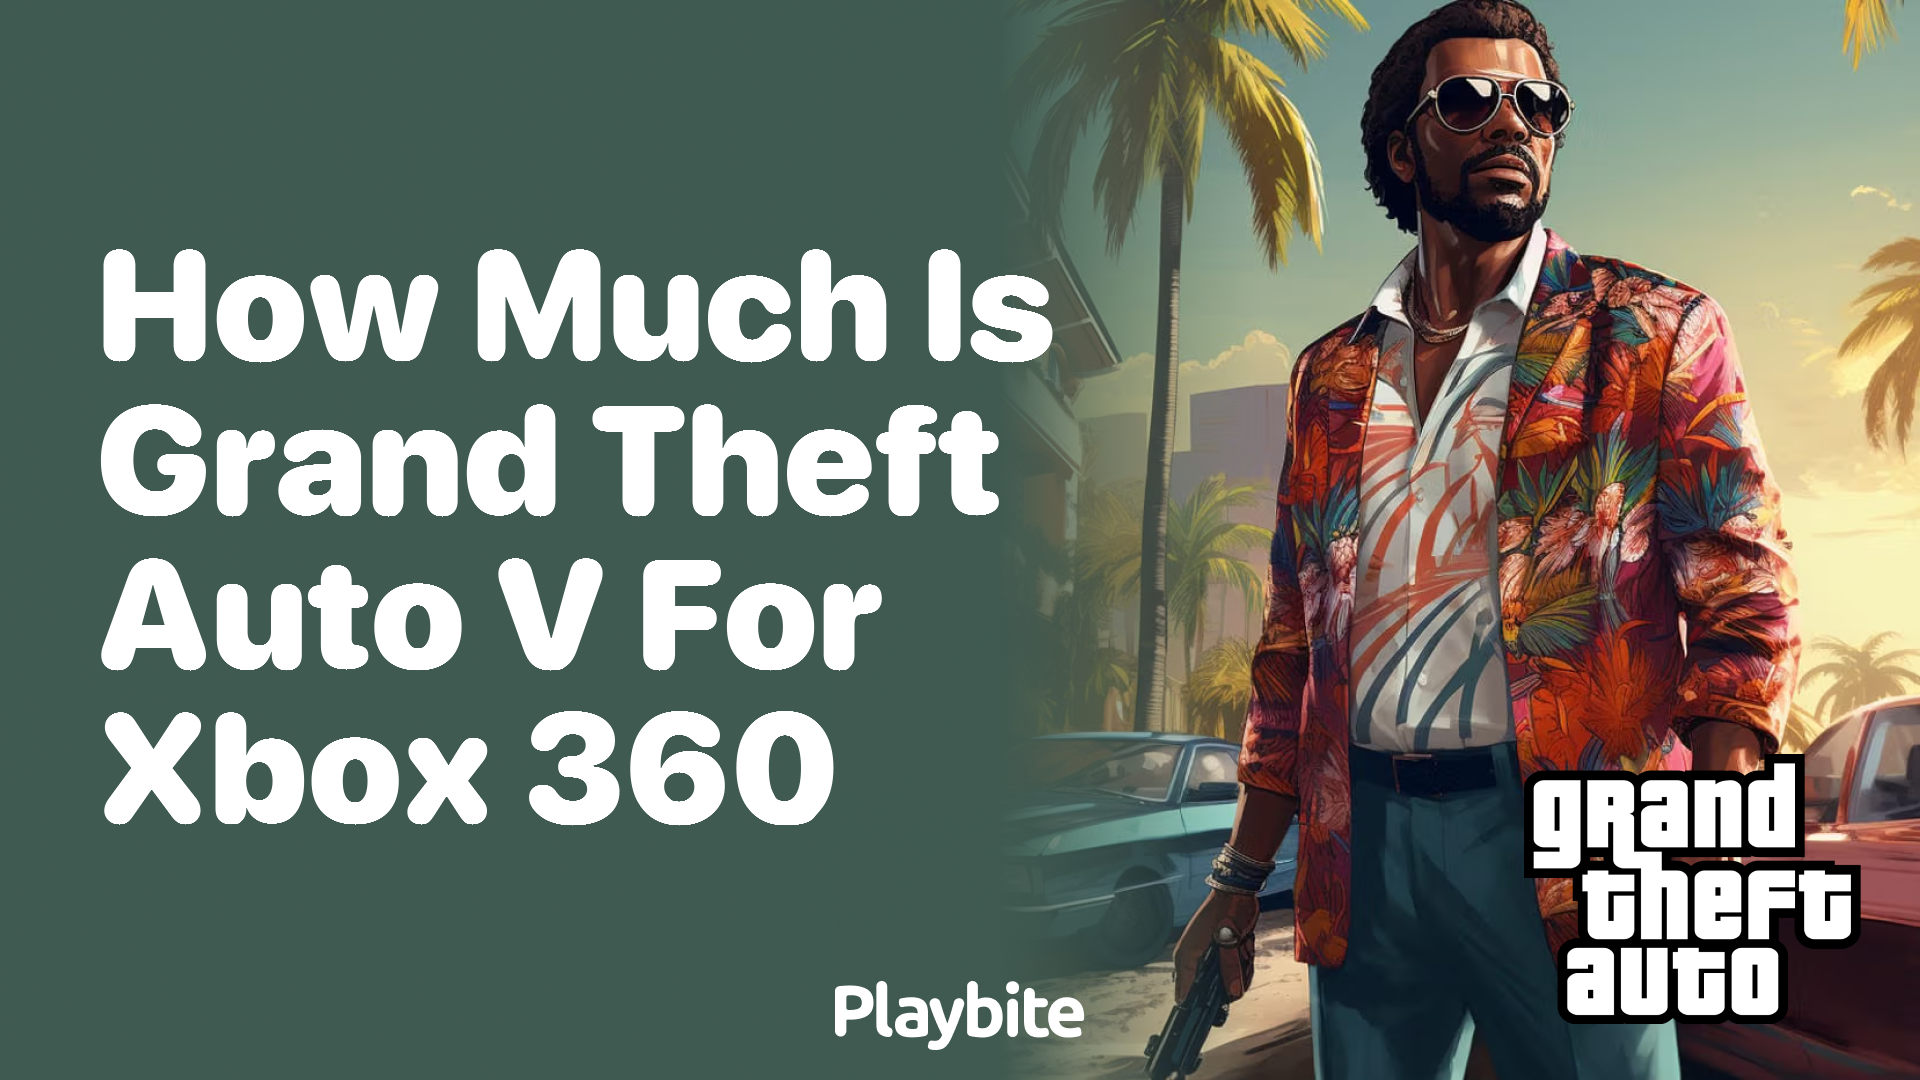 How Much Is Grand Theft Auto V for Xbox 360?